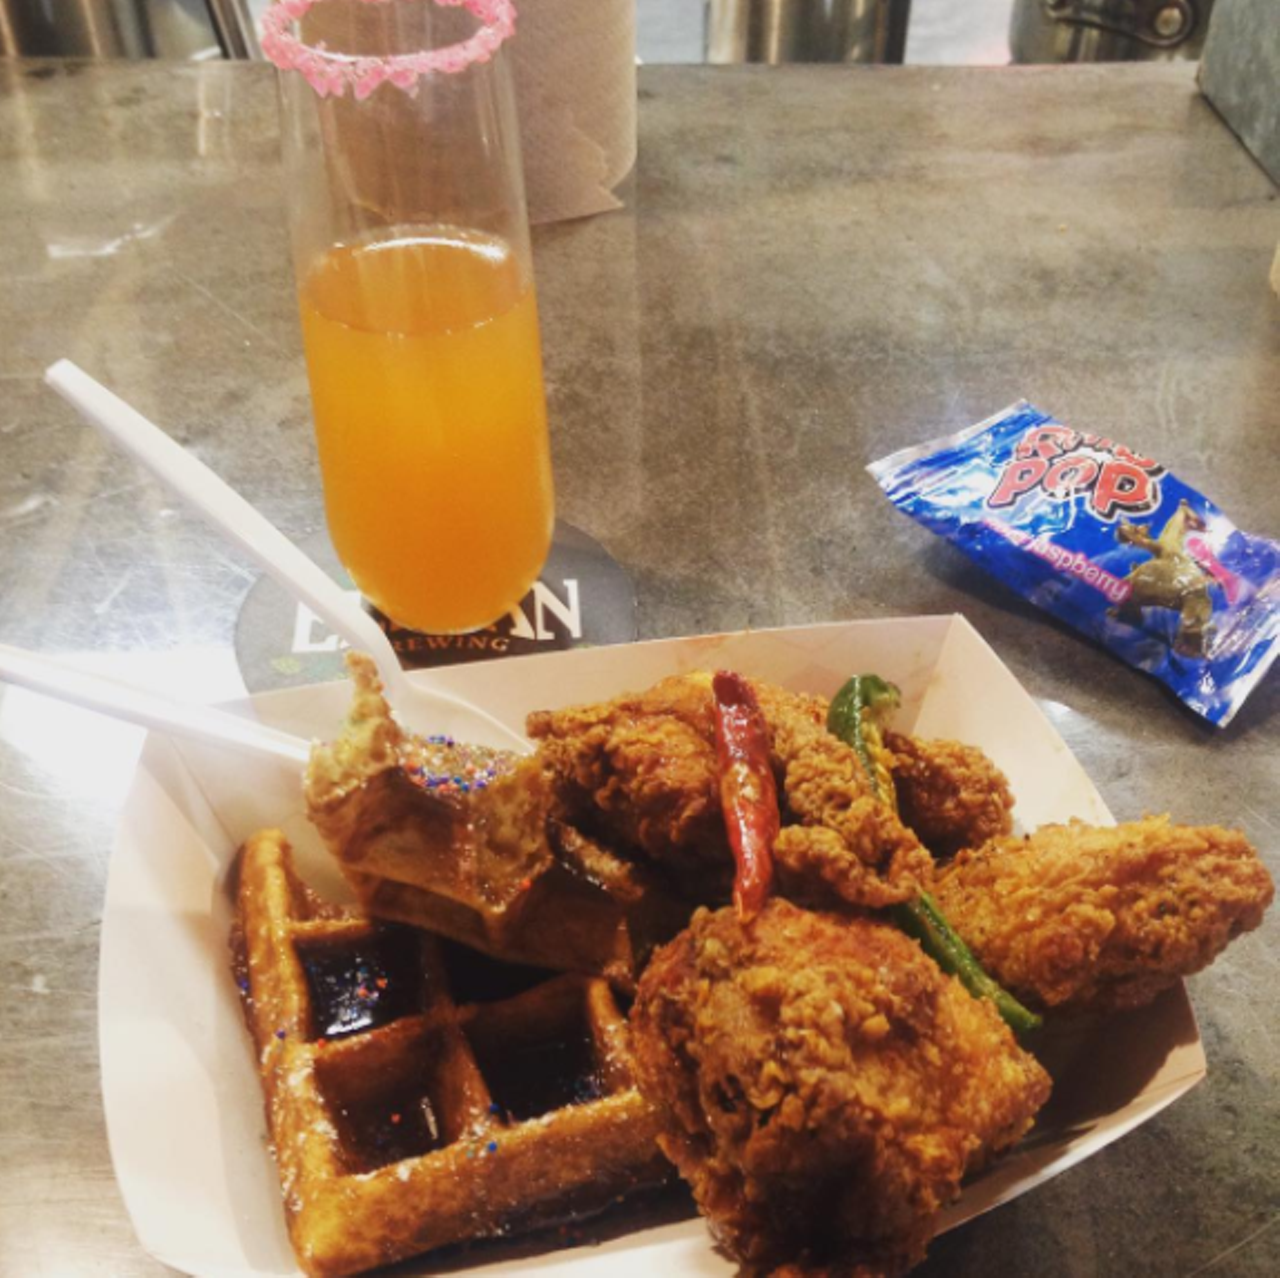 Cullum's Attagirl Icehouse
726 Mistletoe Ave., (210) 437-4263
We'll take the chicken and waffles from Cullum's any day. 
Photo via Instagram, nasaiscool